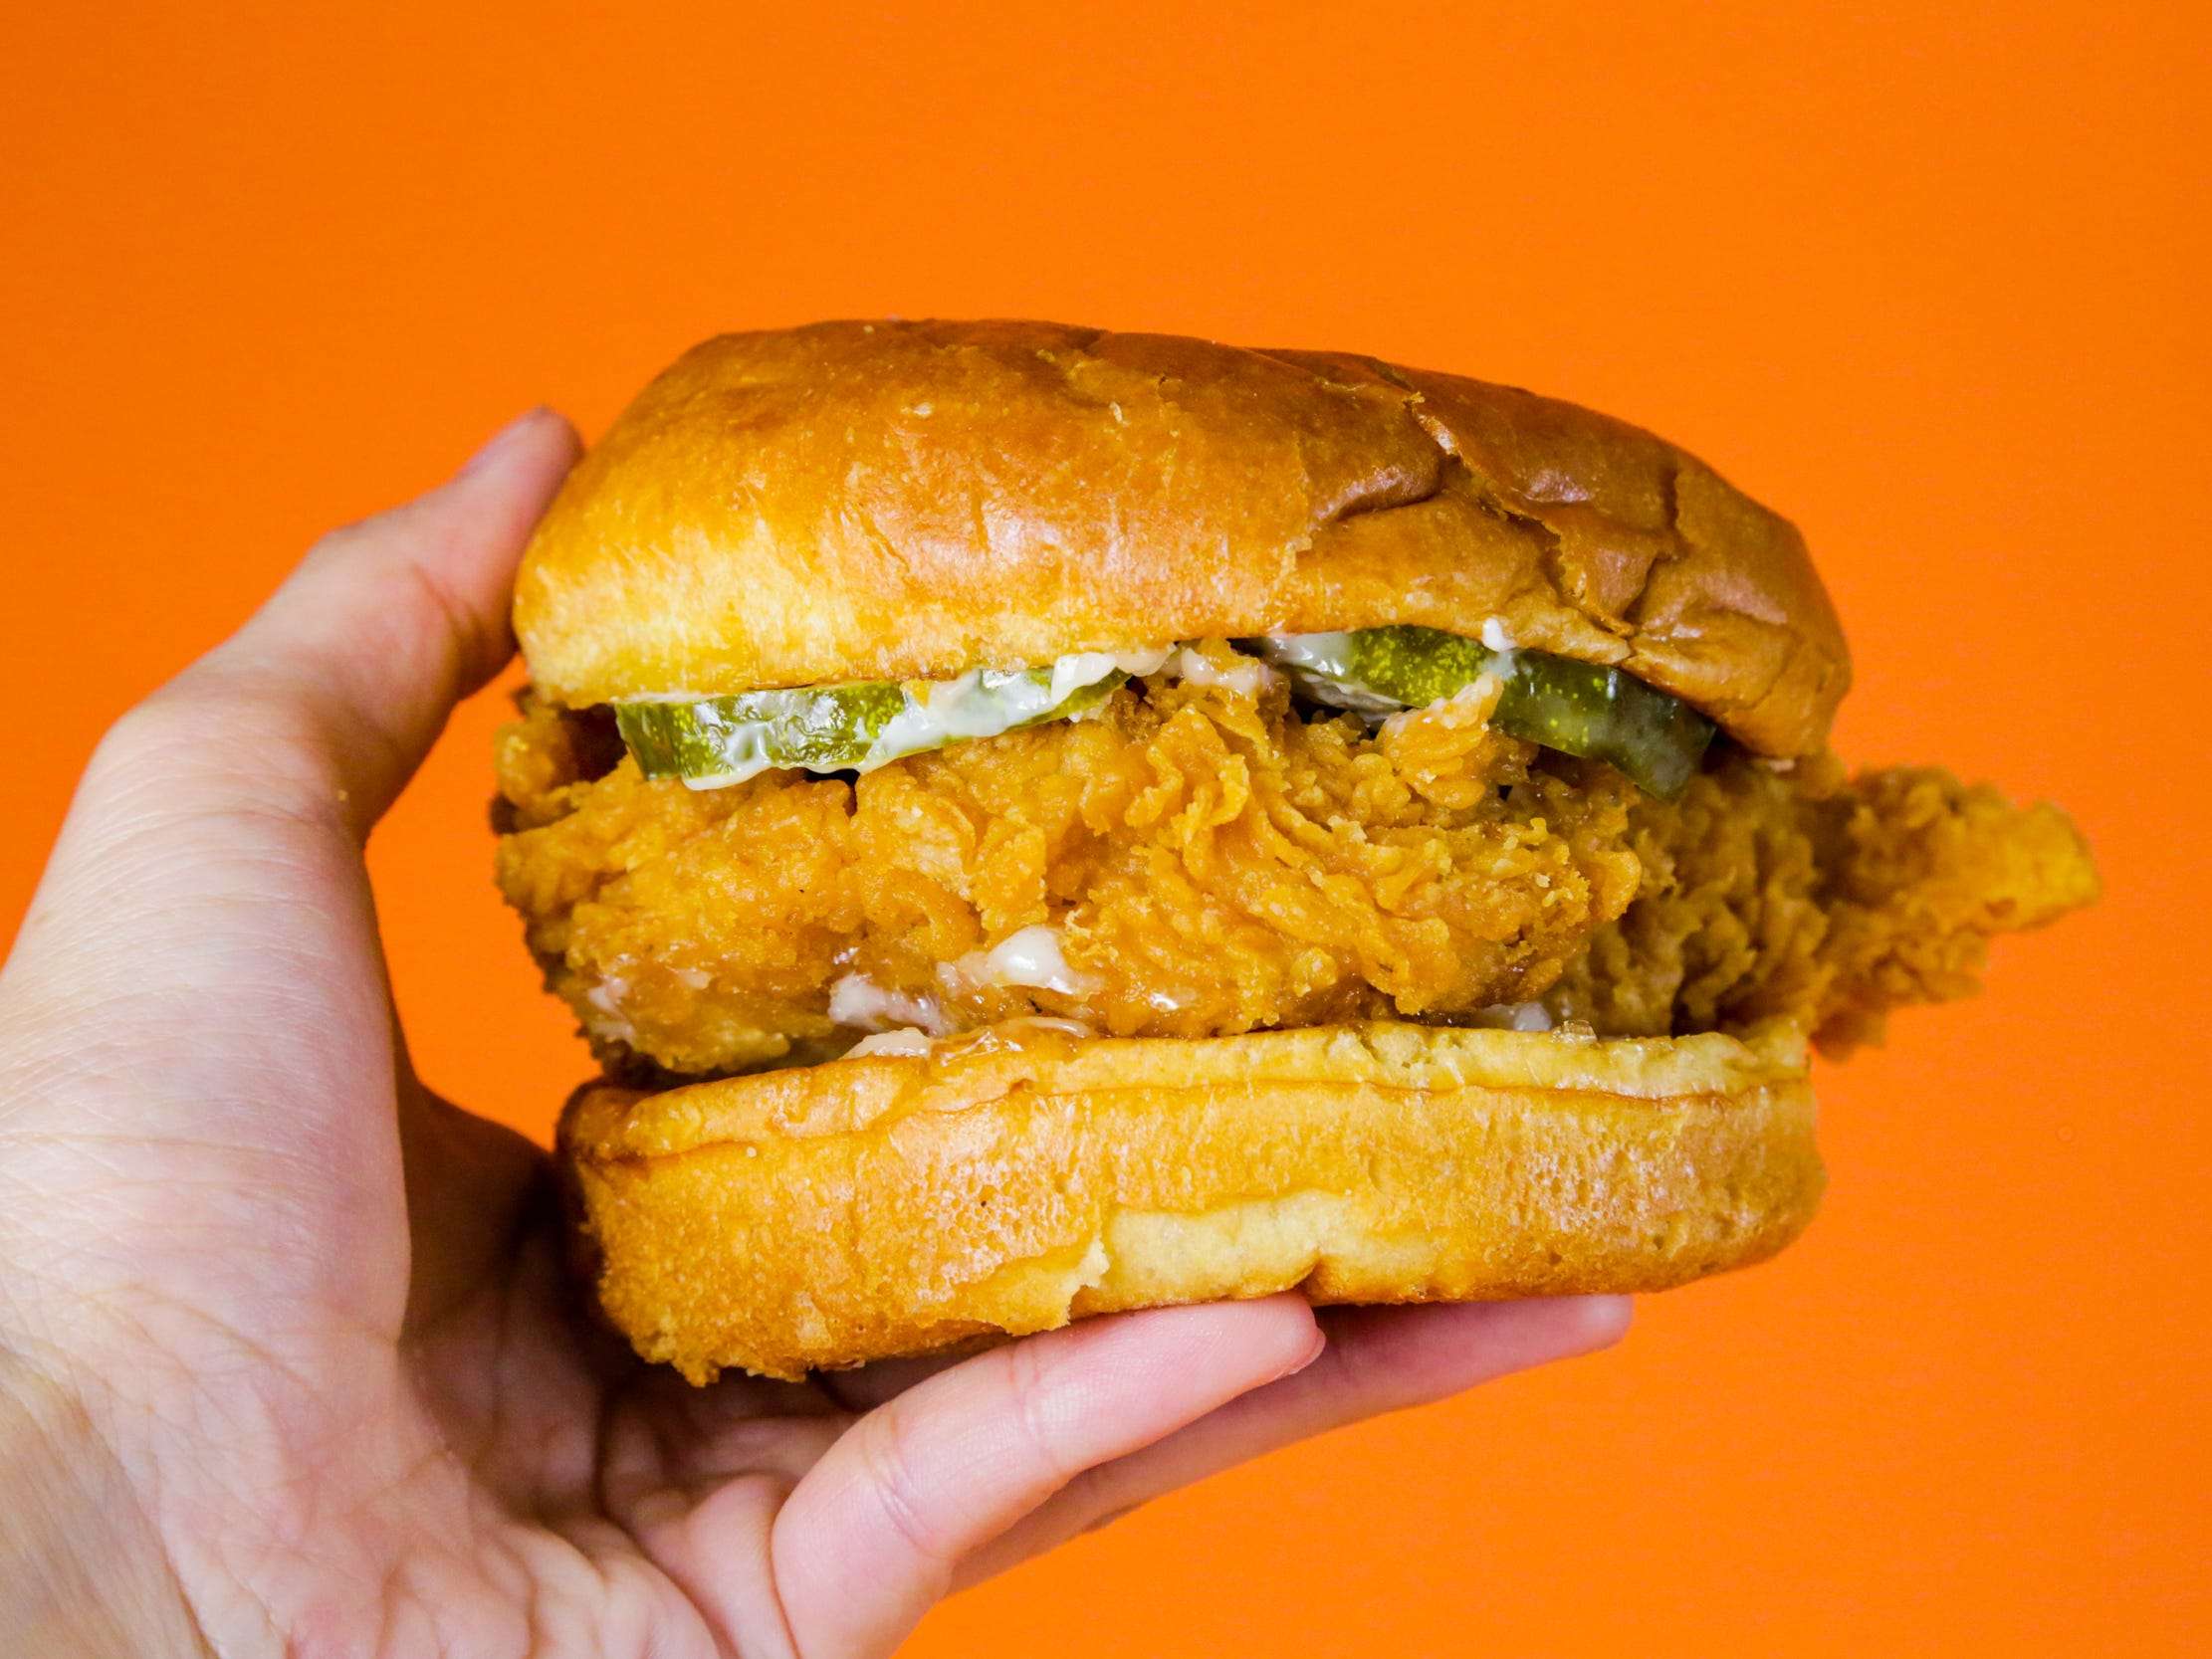 popeyes-takes-aim-at-mcdonald-s-new-chicken-sandwich-with-its-own-free